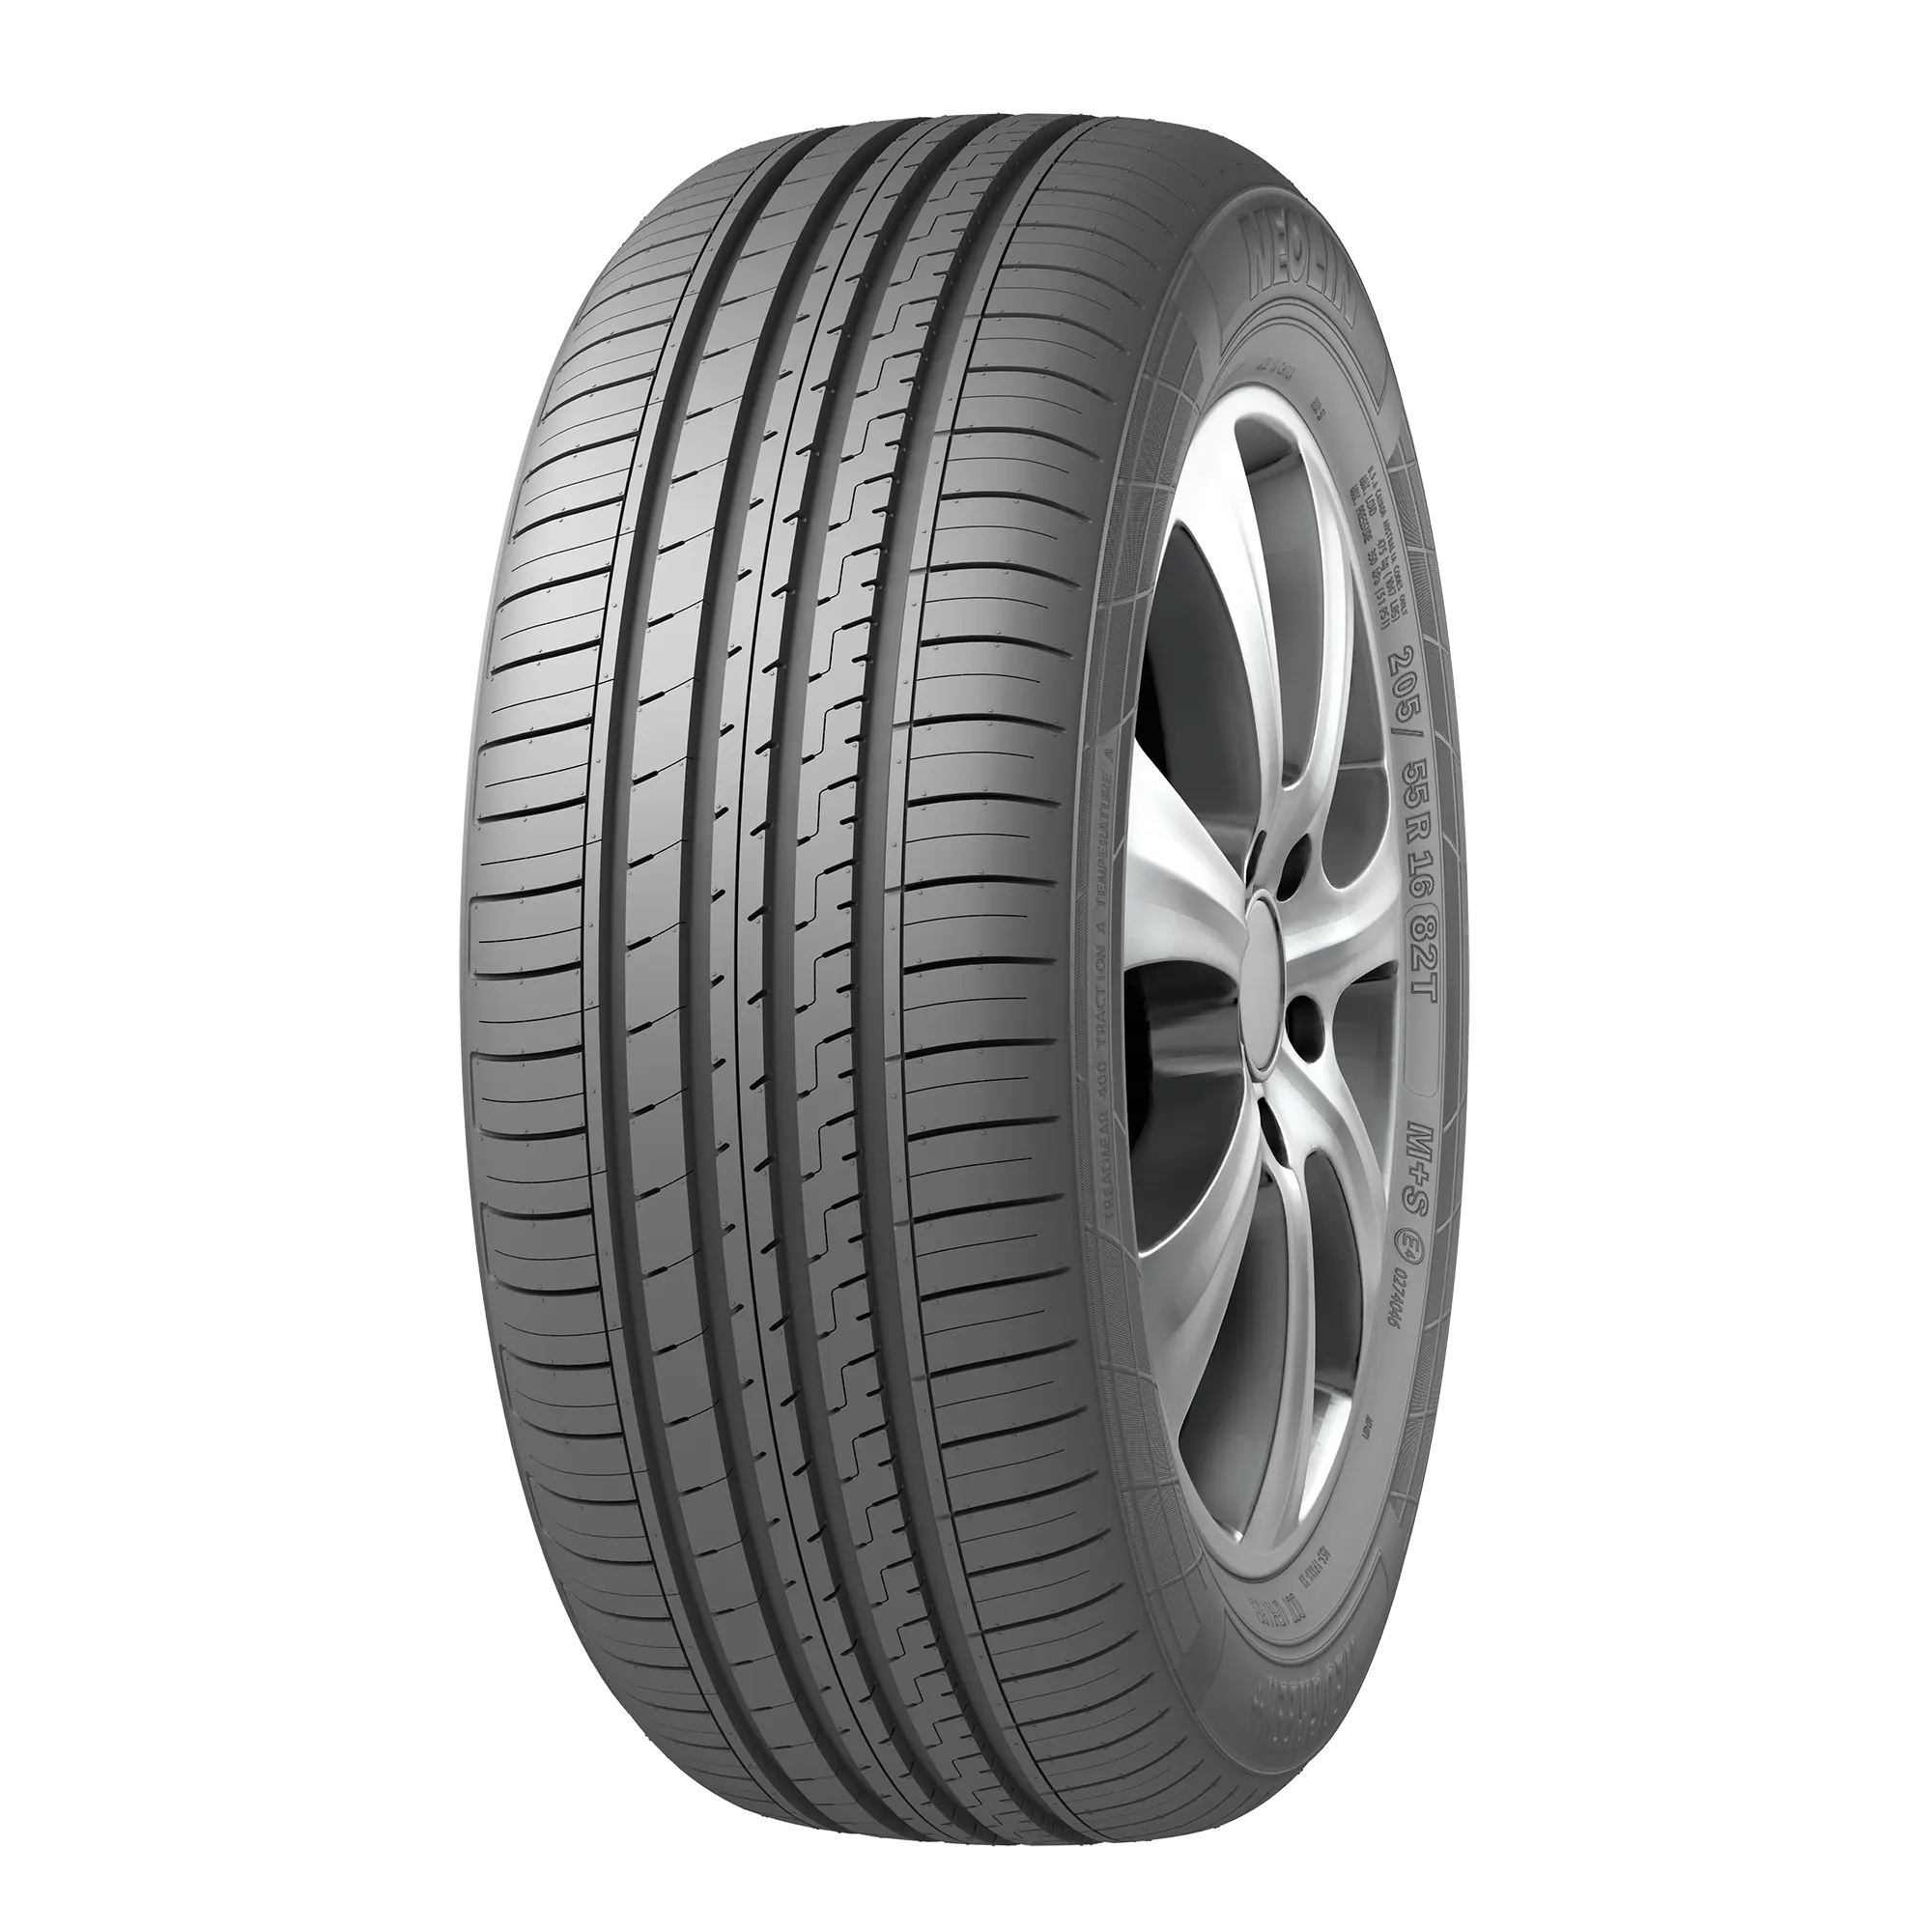 New tires for cars all sizes manufacturer 245/70/16 215 55r17 225 75 16 255 35 20 265/70/16 235/75/15 175 70 r13 175/65/14...